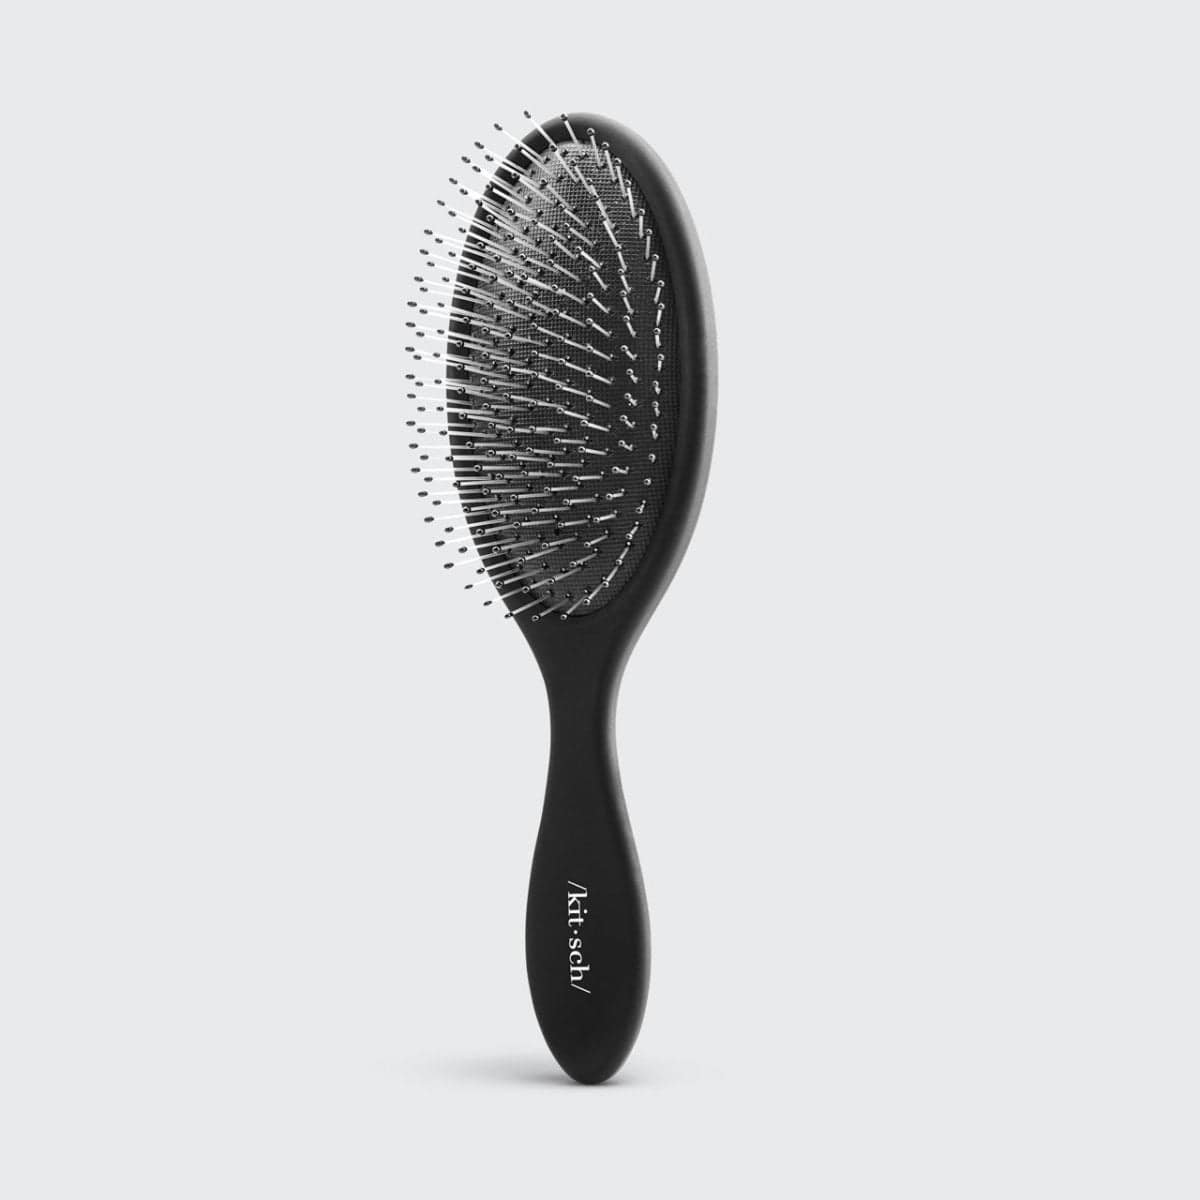 Aria Beauty - We know, cleaning a hairbrush doesn't sound